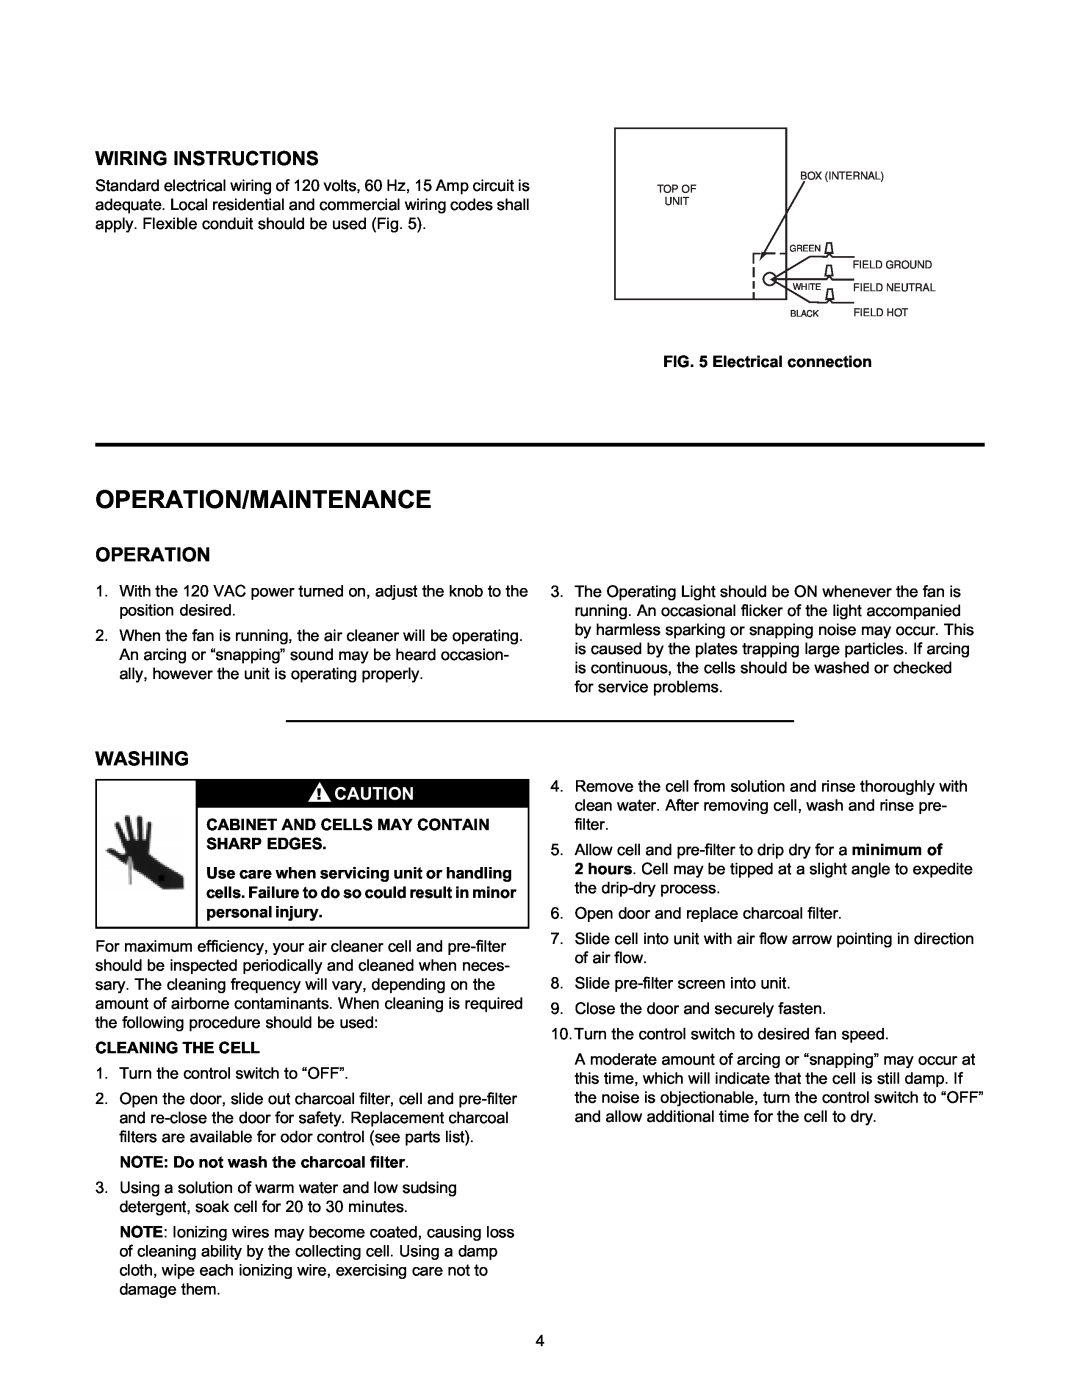 White Rodgers CSC1000 owner manual Operation/Maintenance, Wiring Instructions, Washing 